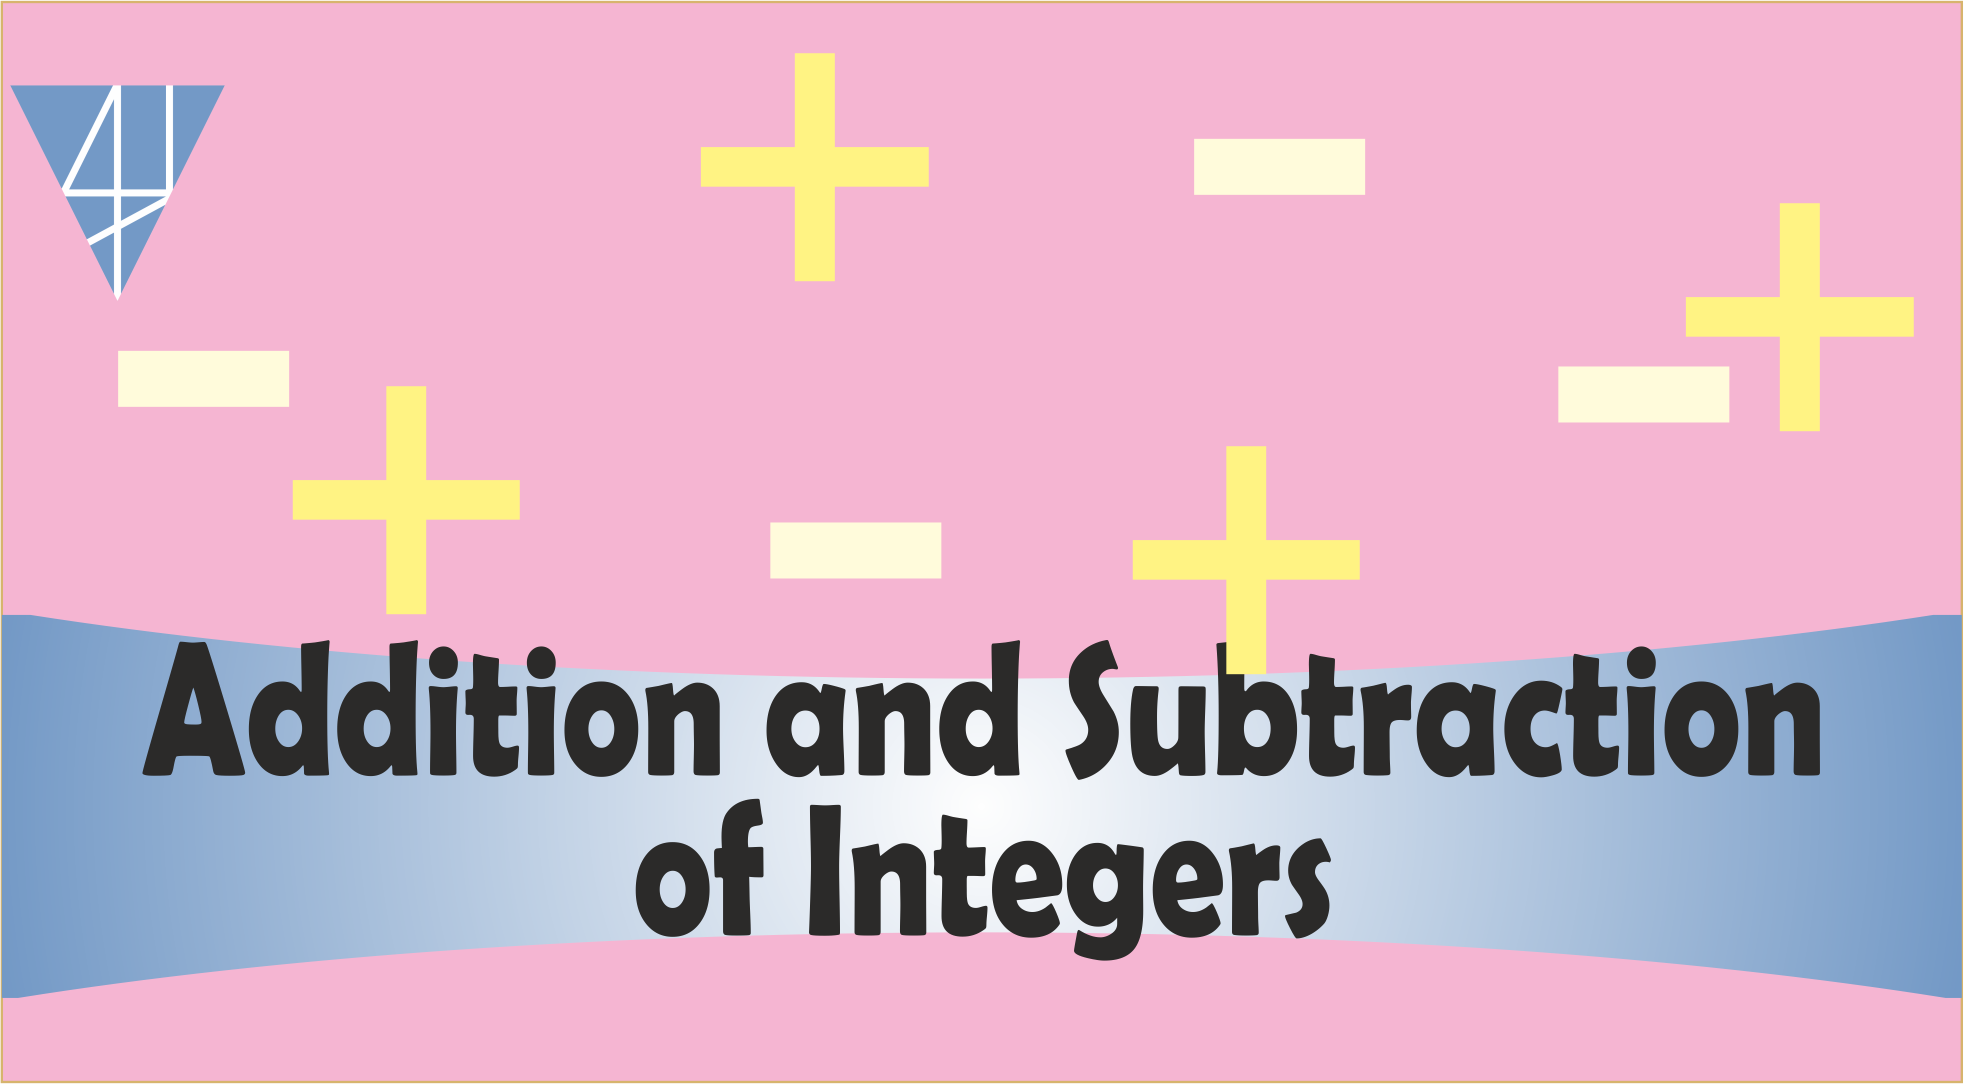 BMS1-Addition and Subtraction of Integers